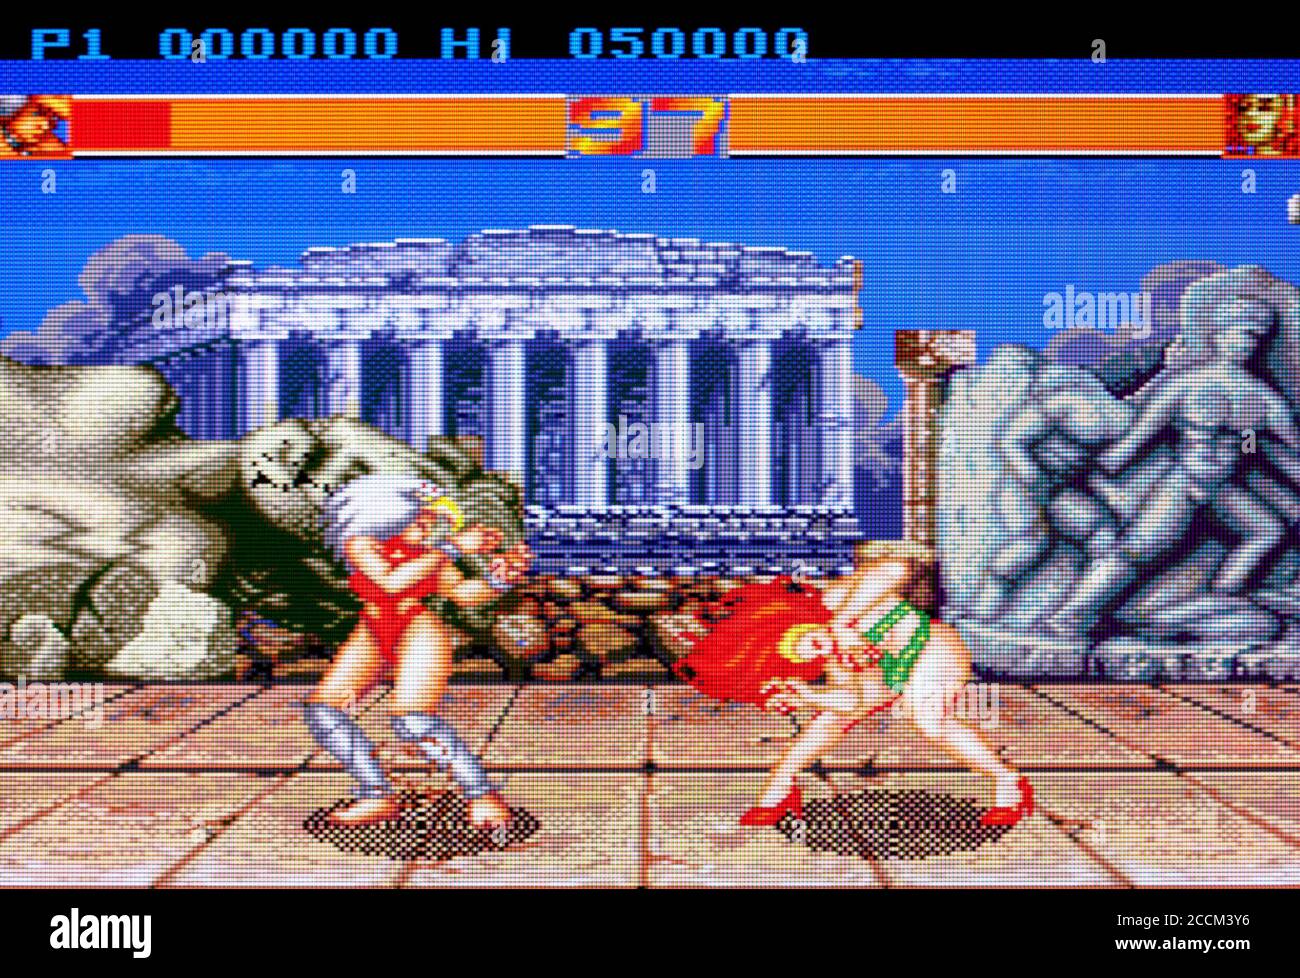 Strip Fighter II 2 - PC Engine Videogame - Editorial use only